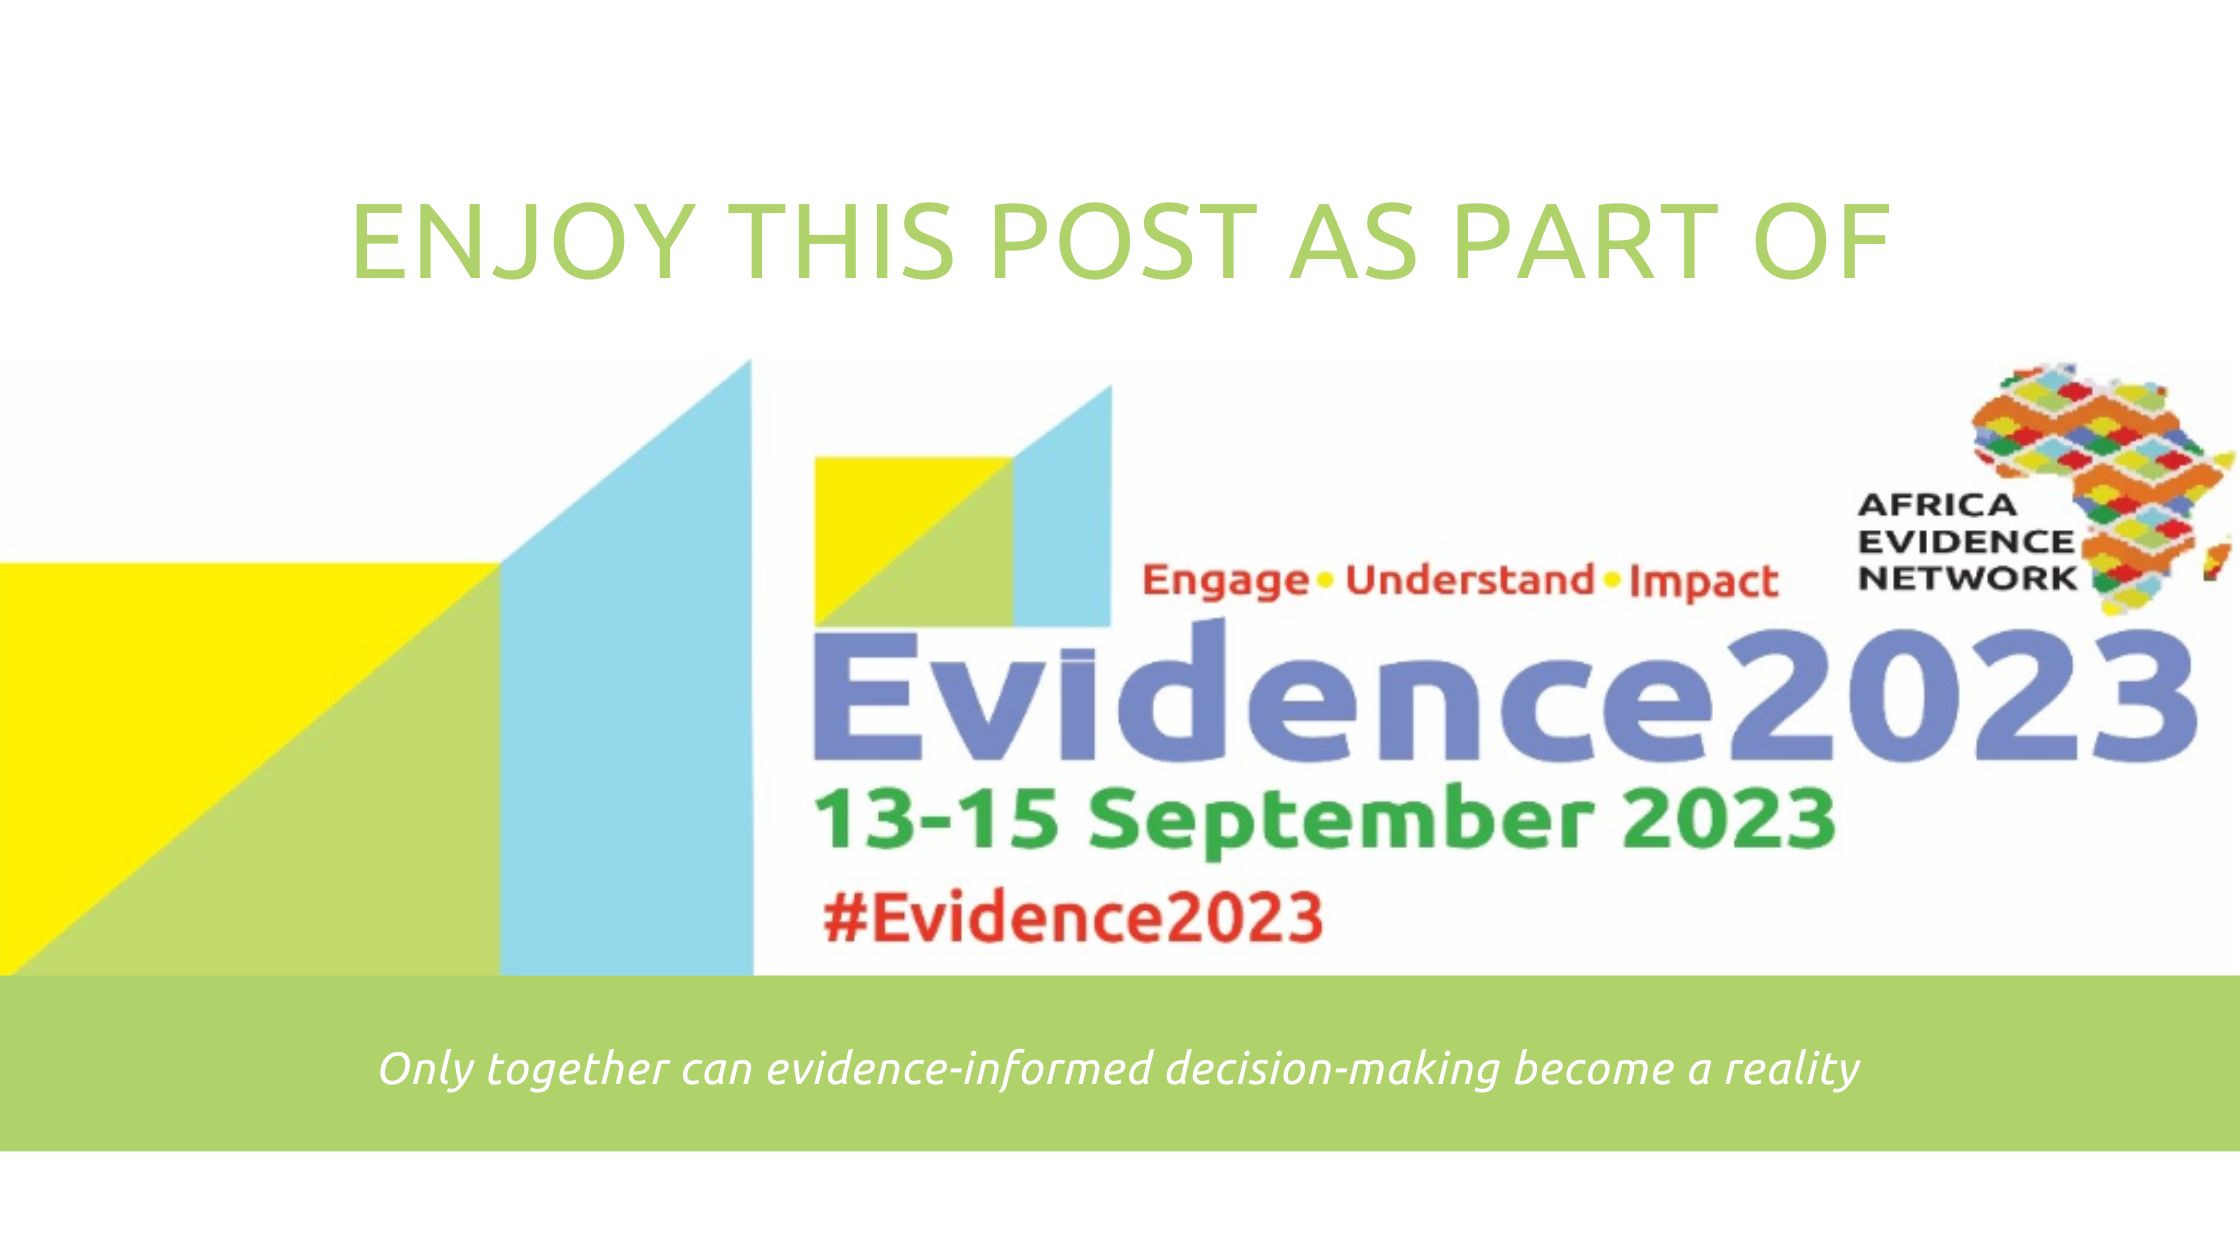 Session 7: Reconceptualising Evidence for EIDM practice